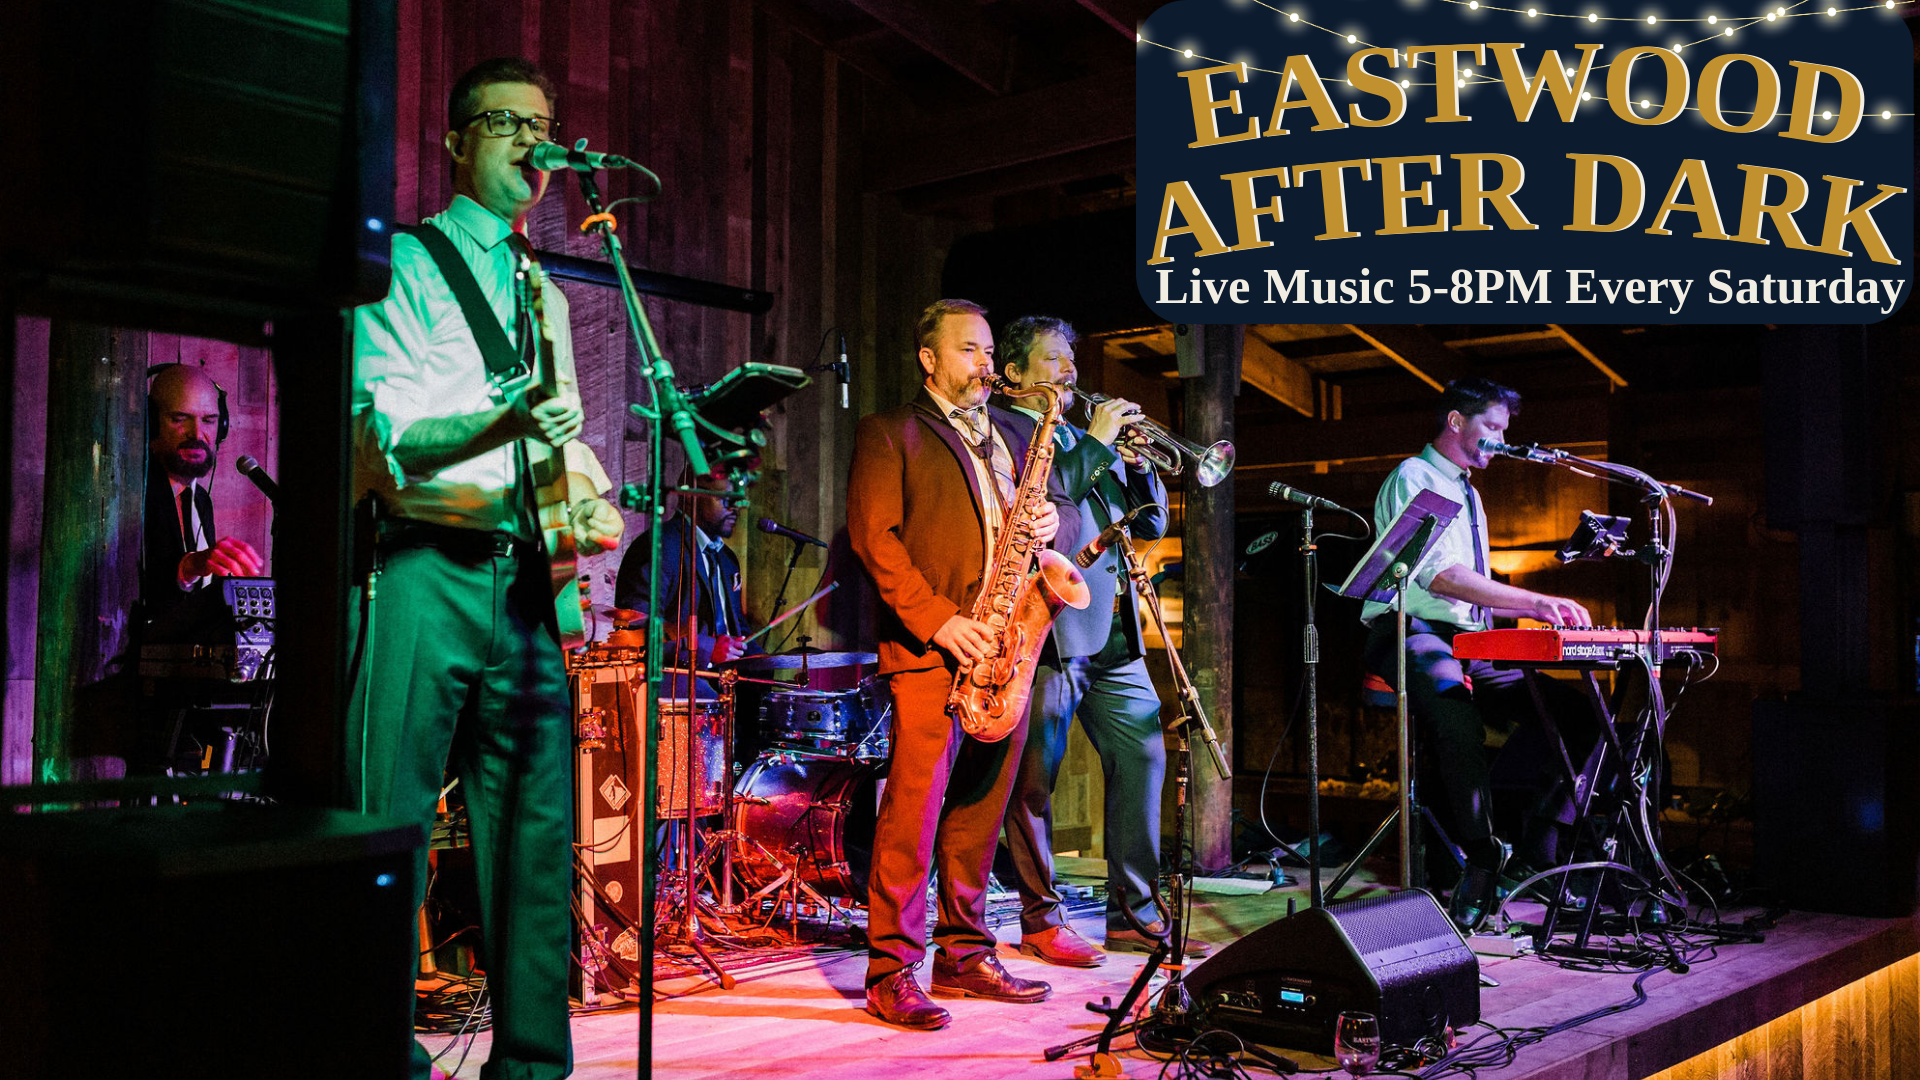 Eastwood After Dark 🎺 | Live Music & Dancing Every Saturday Night